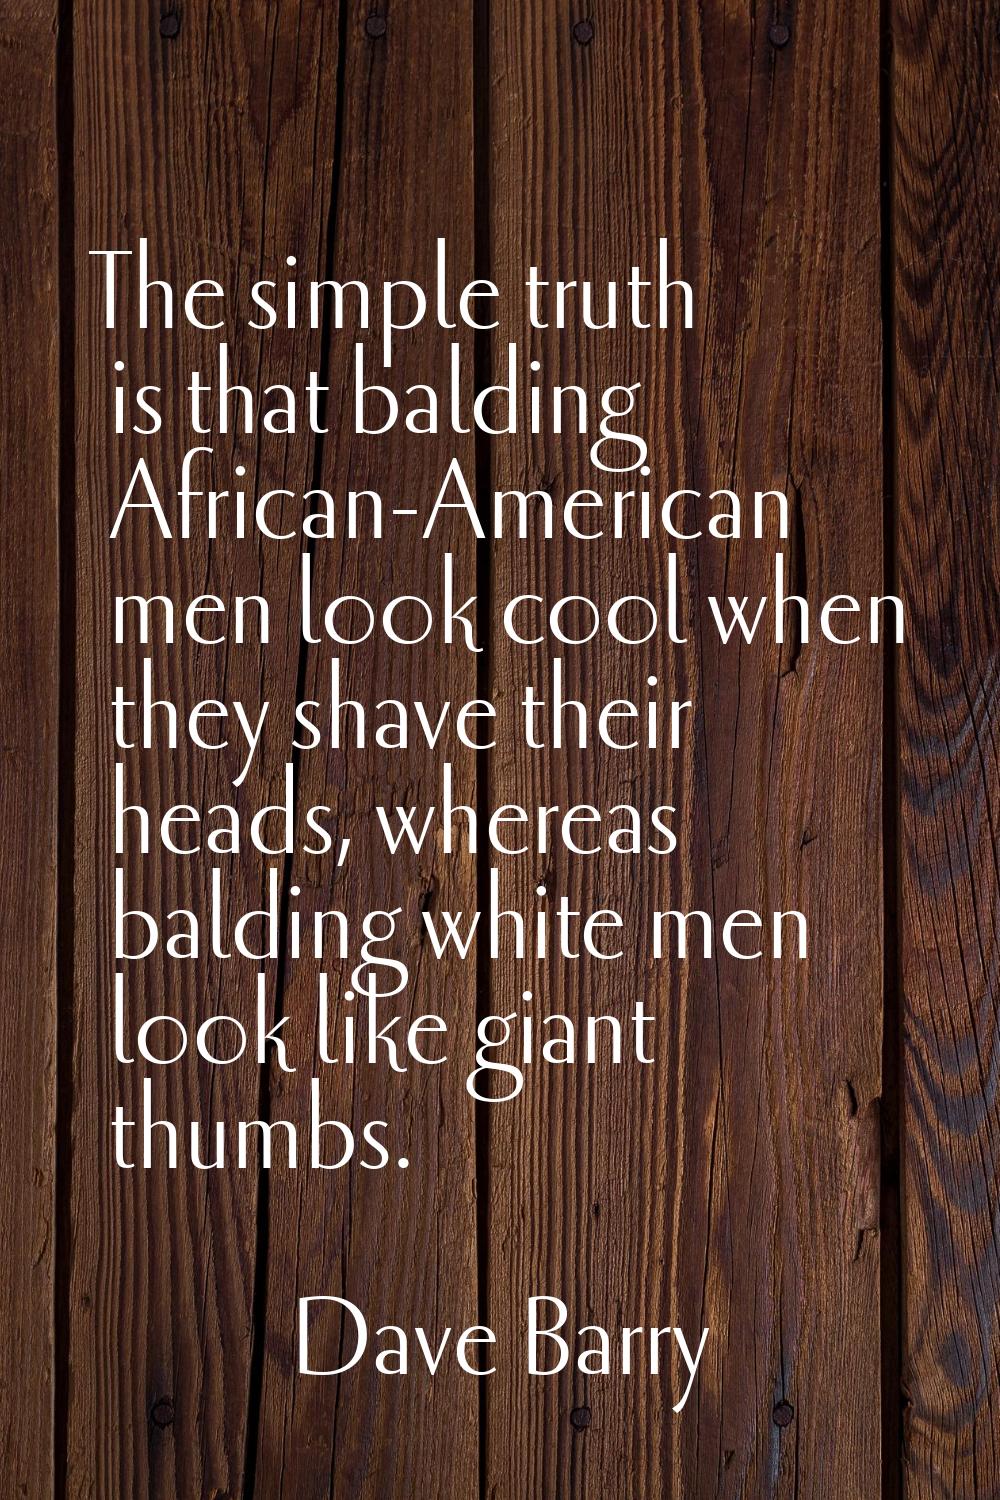 The simple truth is that balding African-American men look cool when they shave their heads, wherea